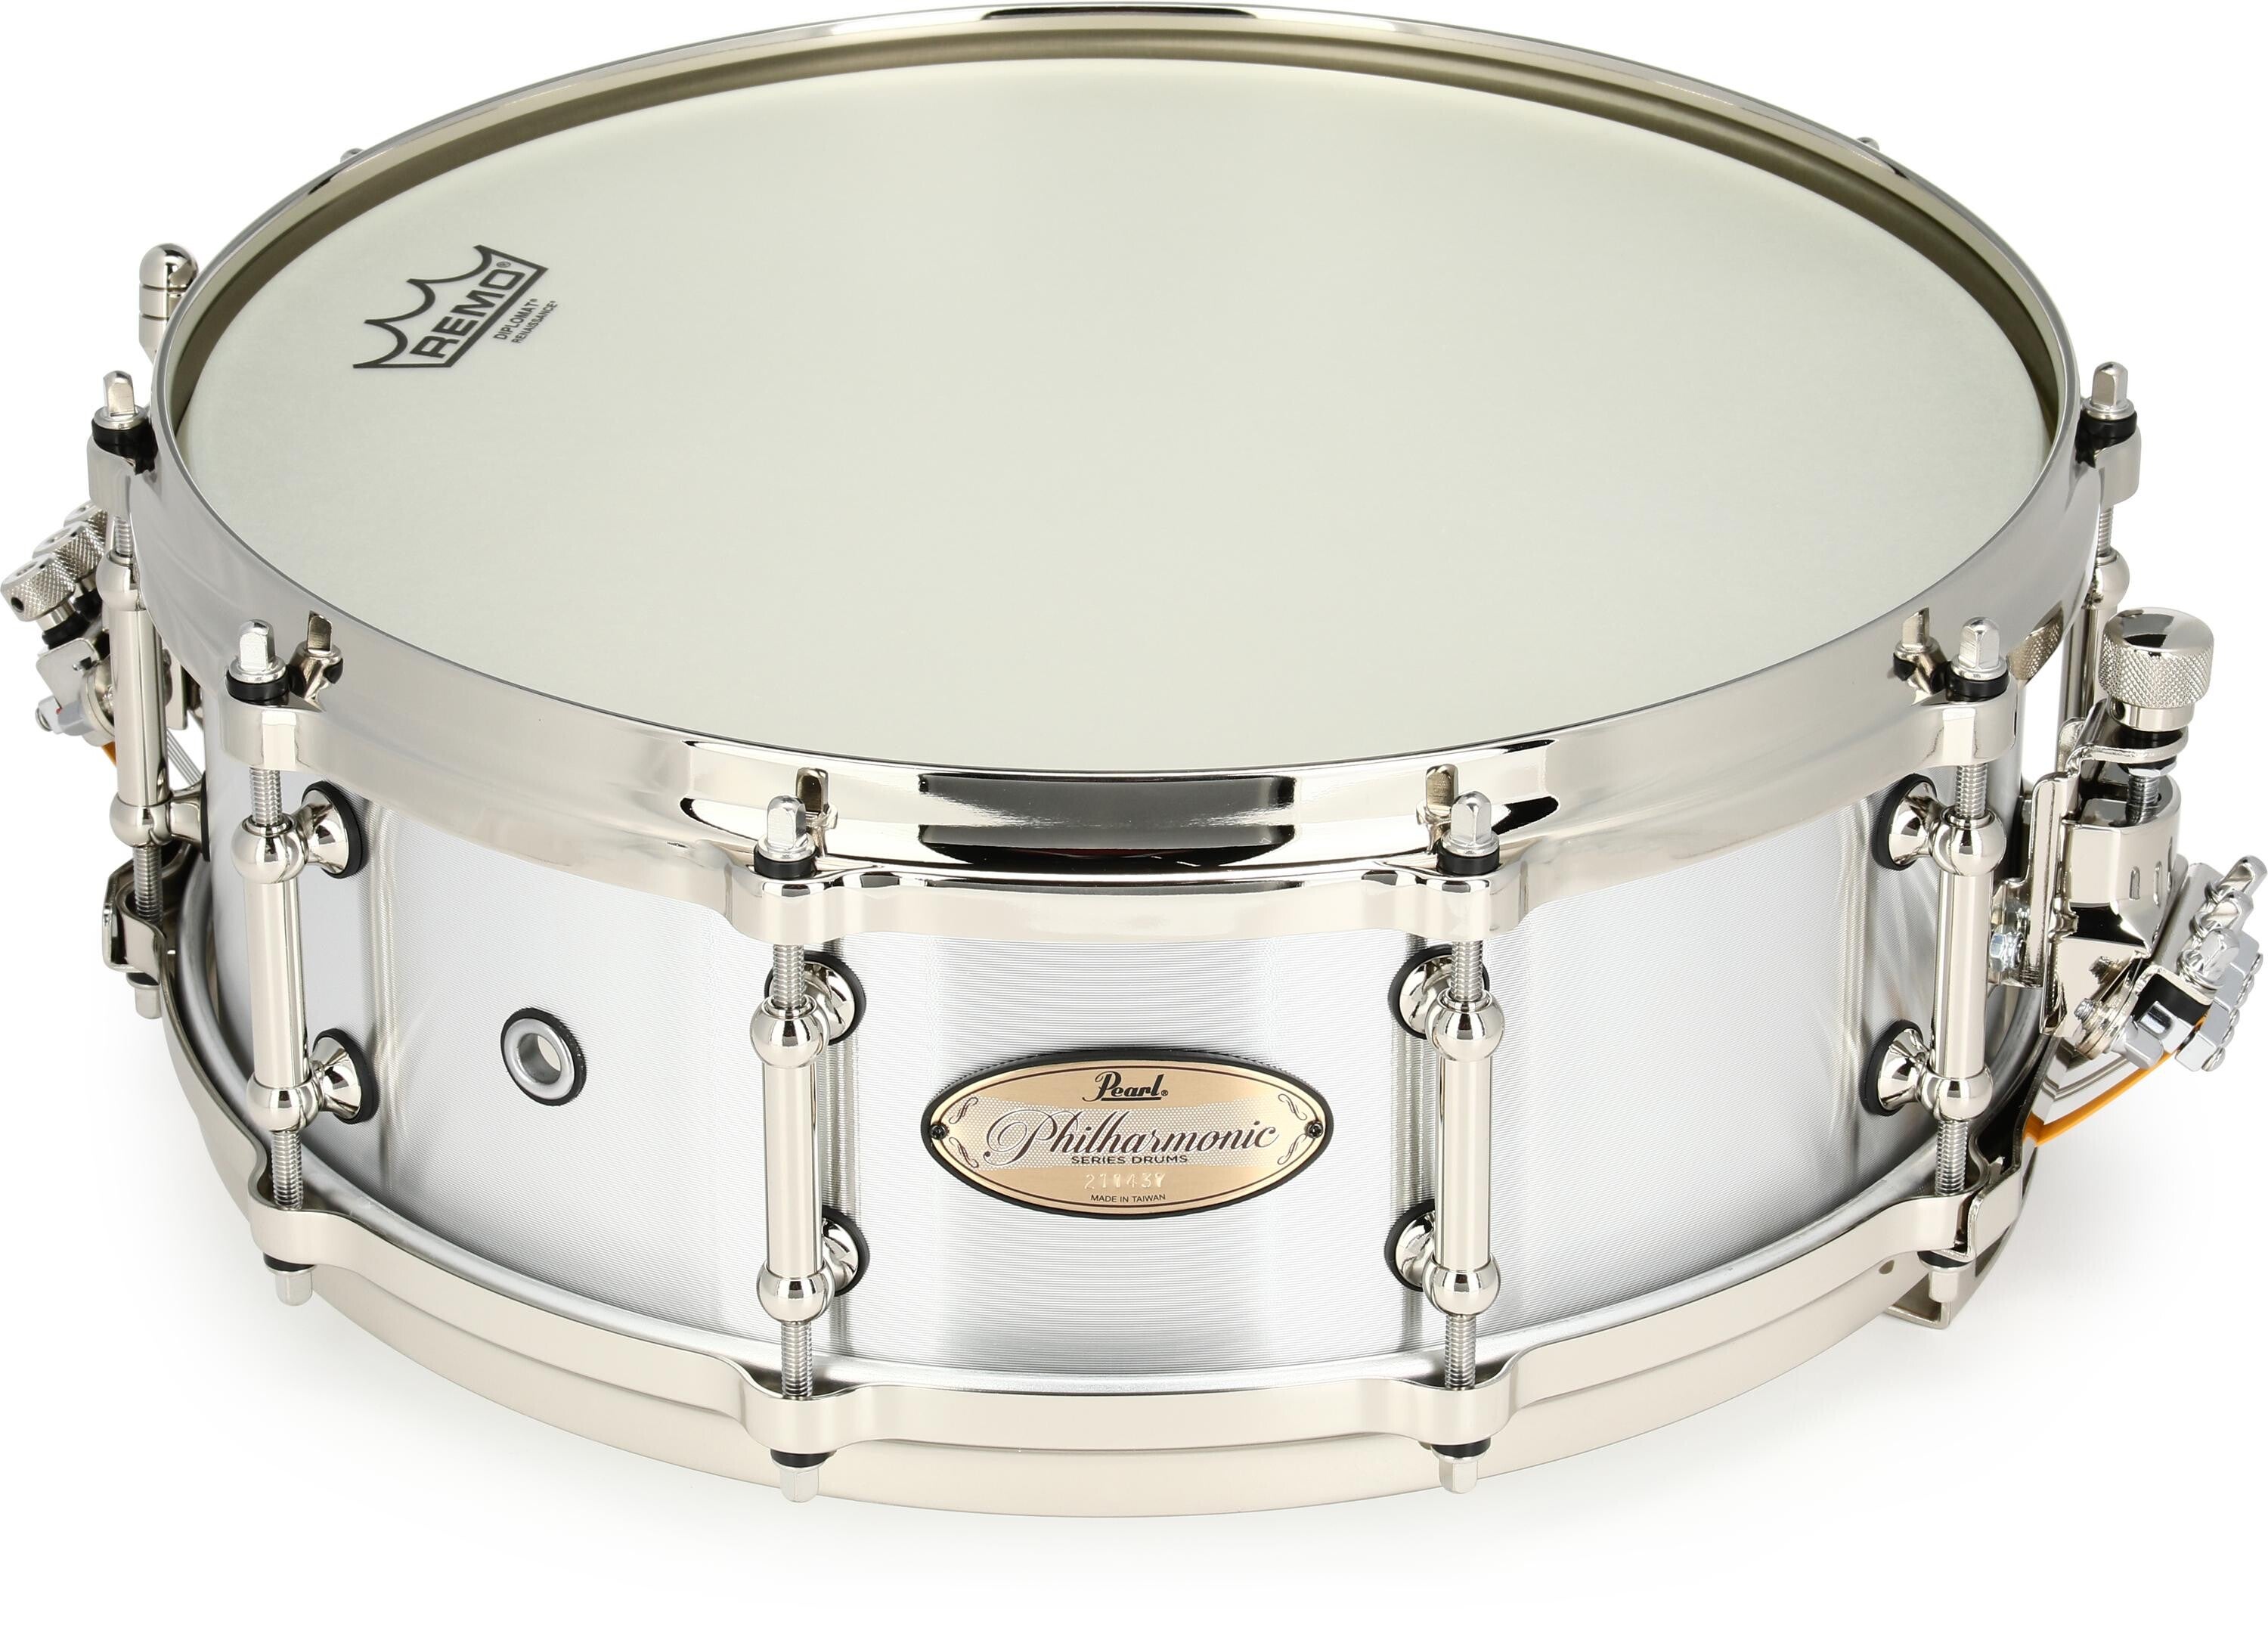 Pearl Philharmonic Cast Aluminum Snare Drum 5-inch x 14-inch Sweetwater